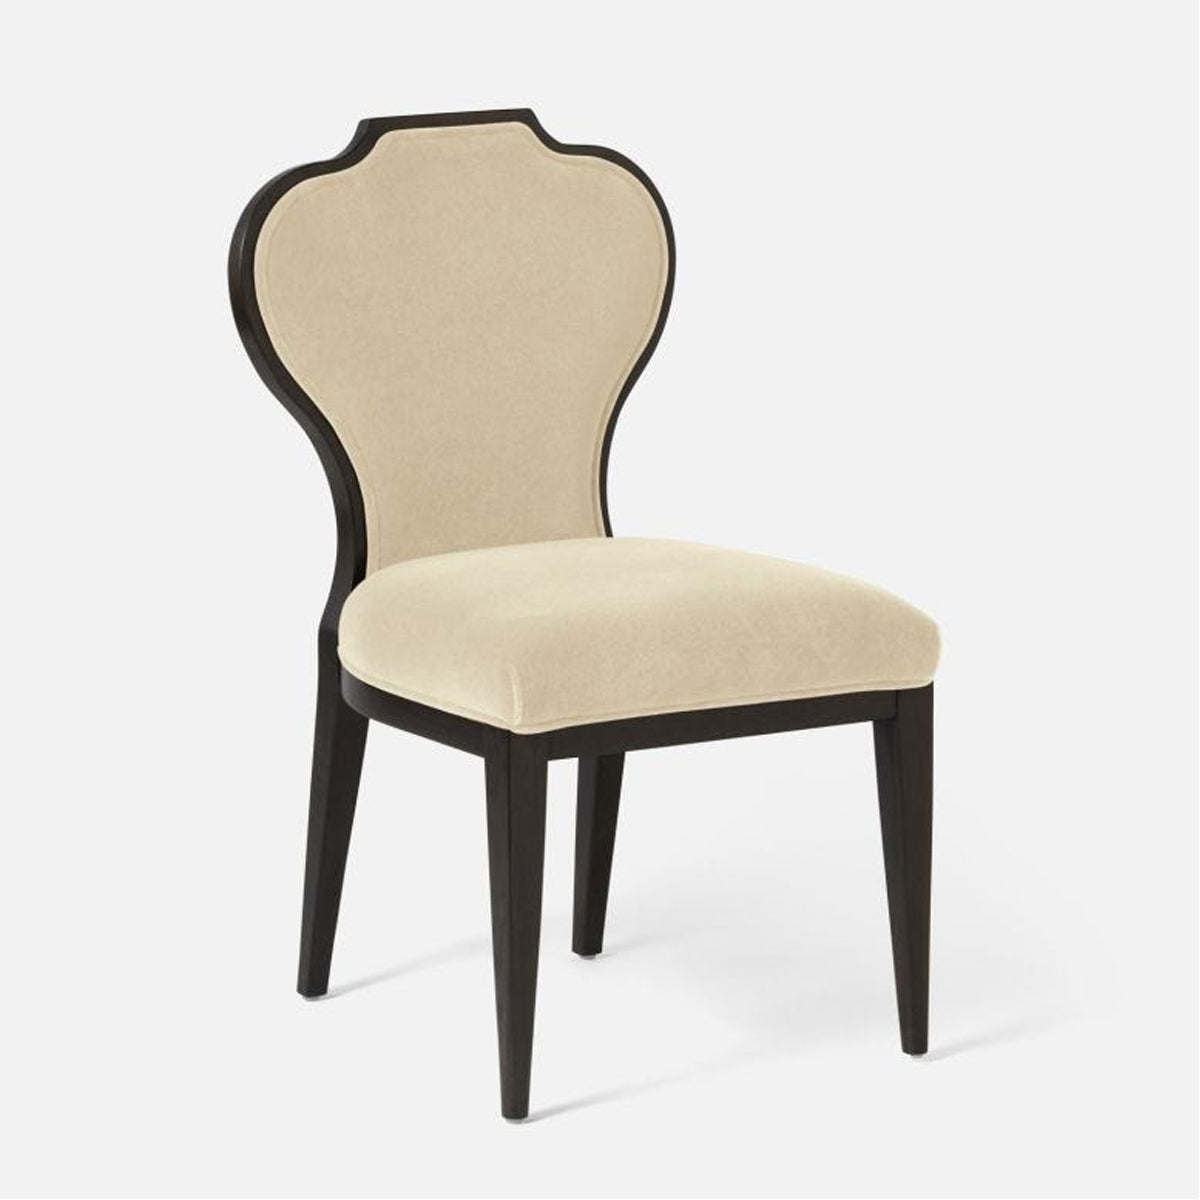 Made Goods Joanna Dining Chair in Danube Fabric